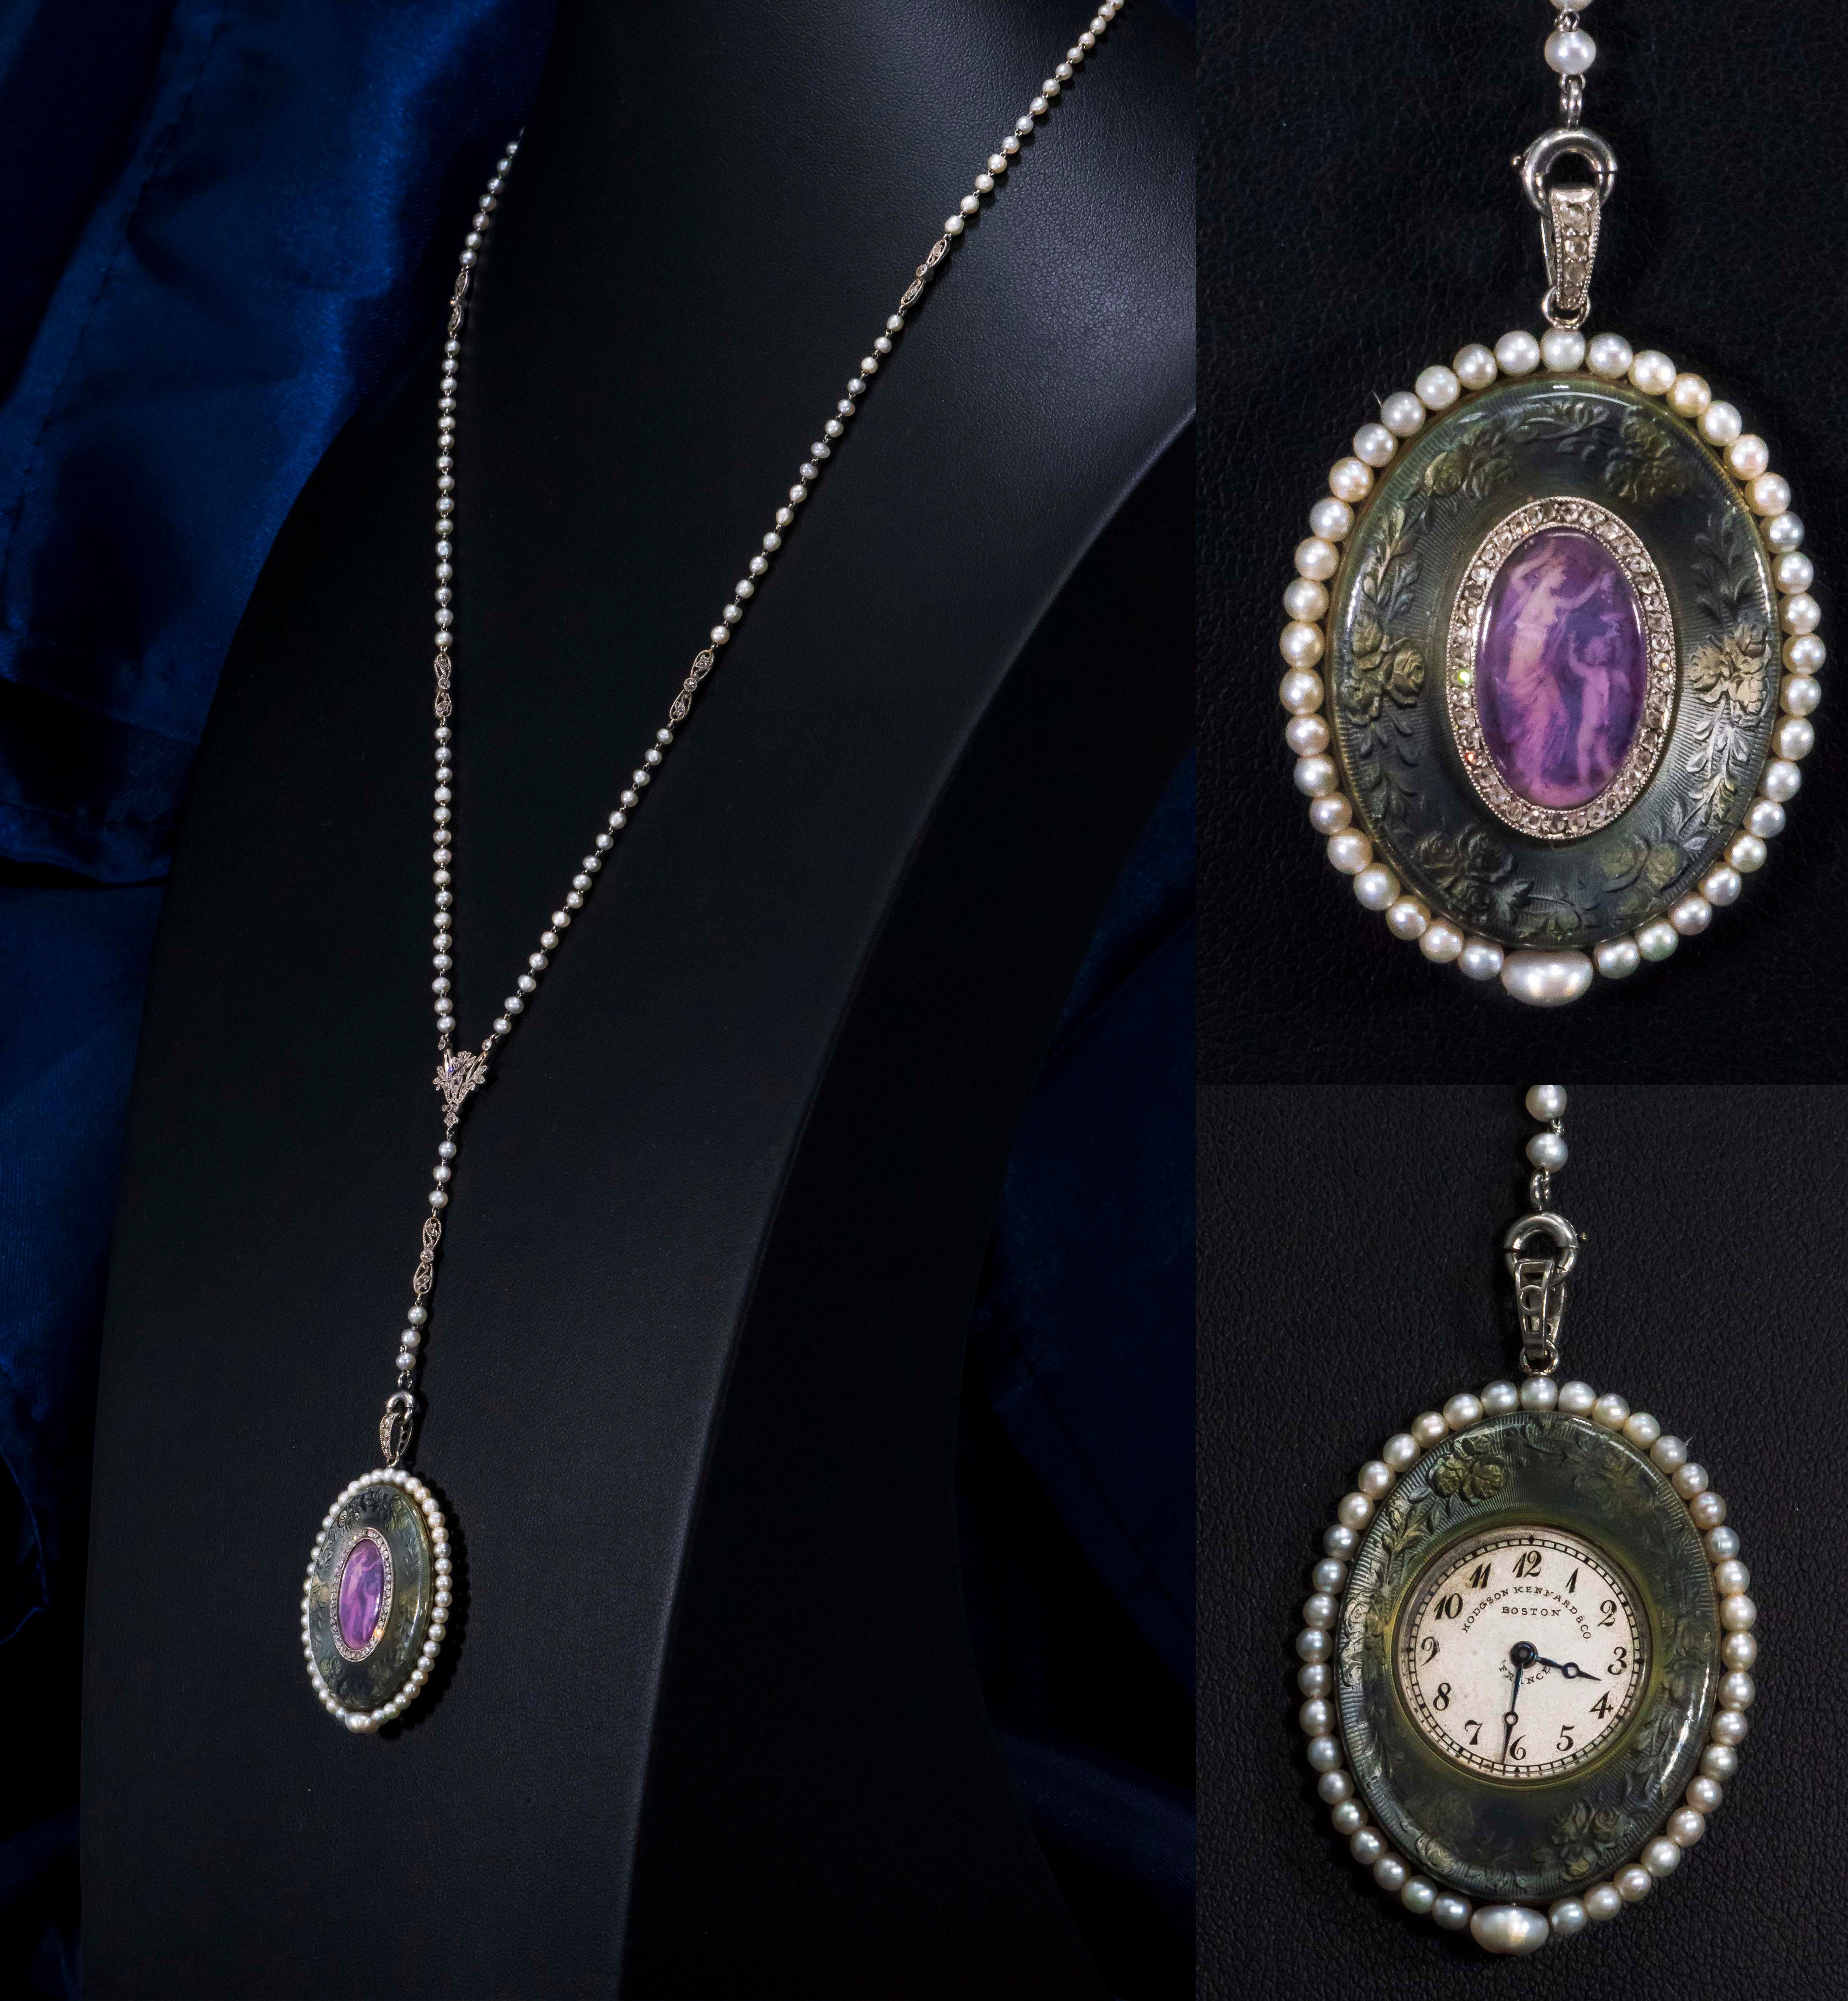 Dimensions

50mm Drop from center Sautiour 
Pendant watch 29mm x 38mm
Pendant thickness 6mm
Signed Verger Freres on Case, French Hallmarked


The present timepiece is a very rare and beautiful platinum Diamond pearl and Enamel pendant watch made